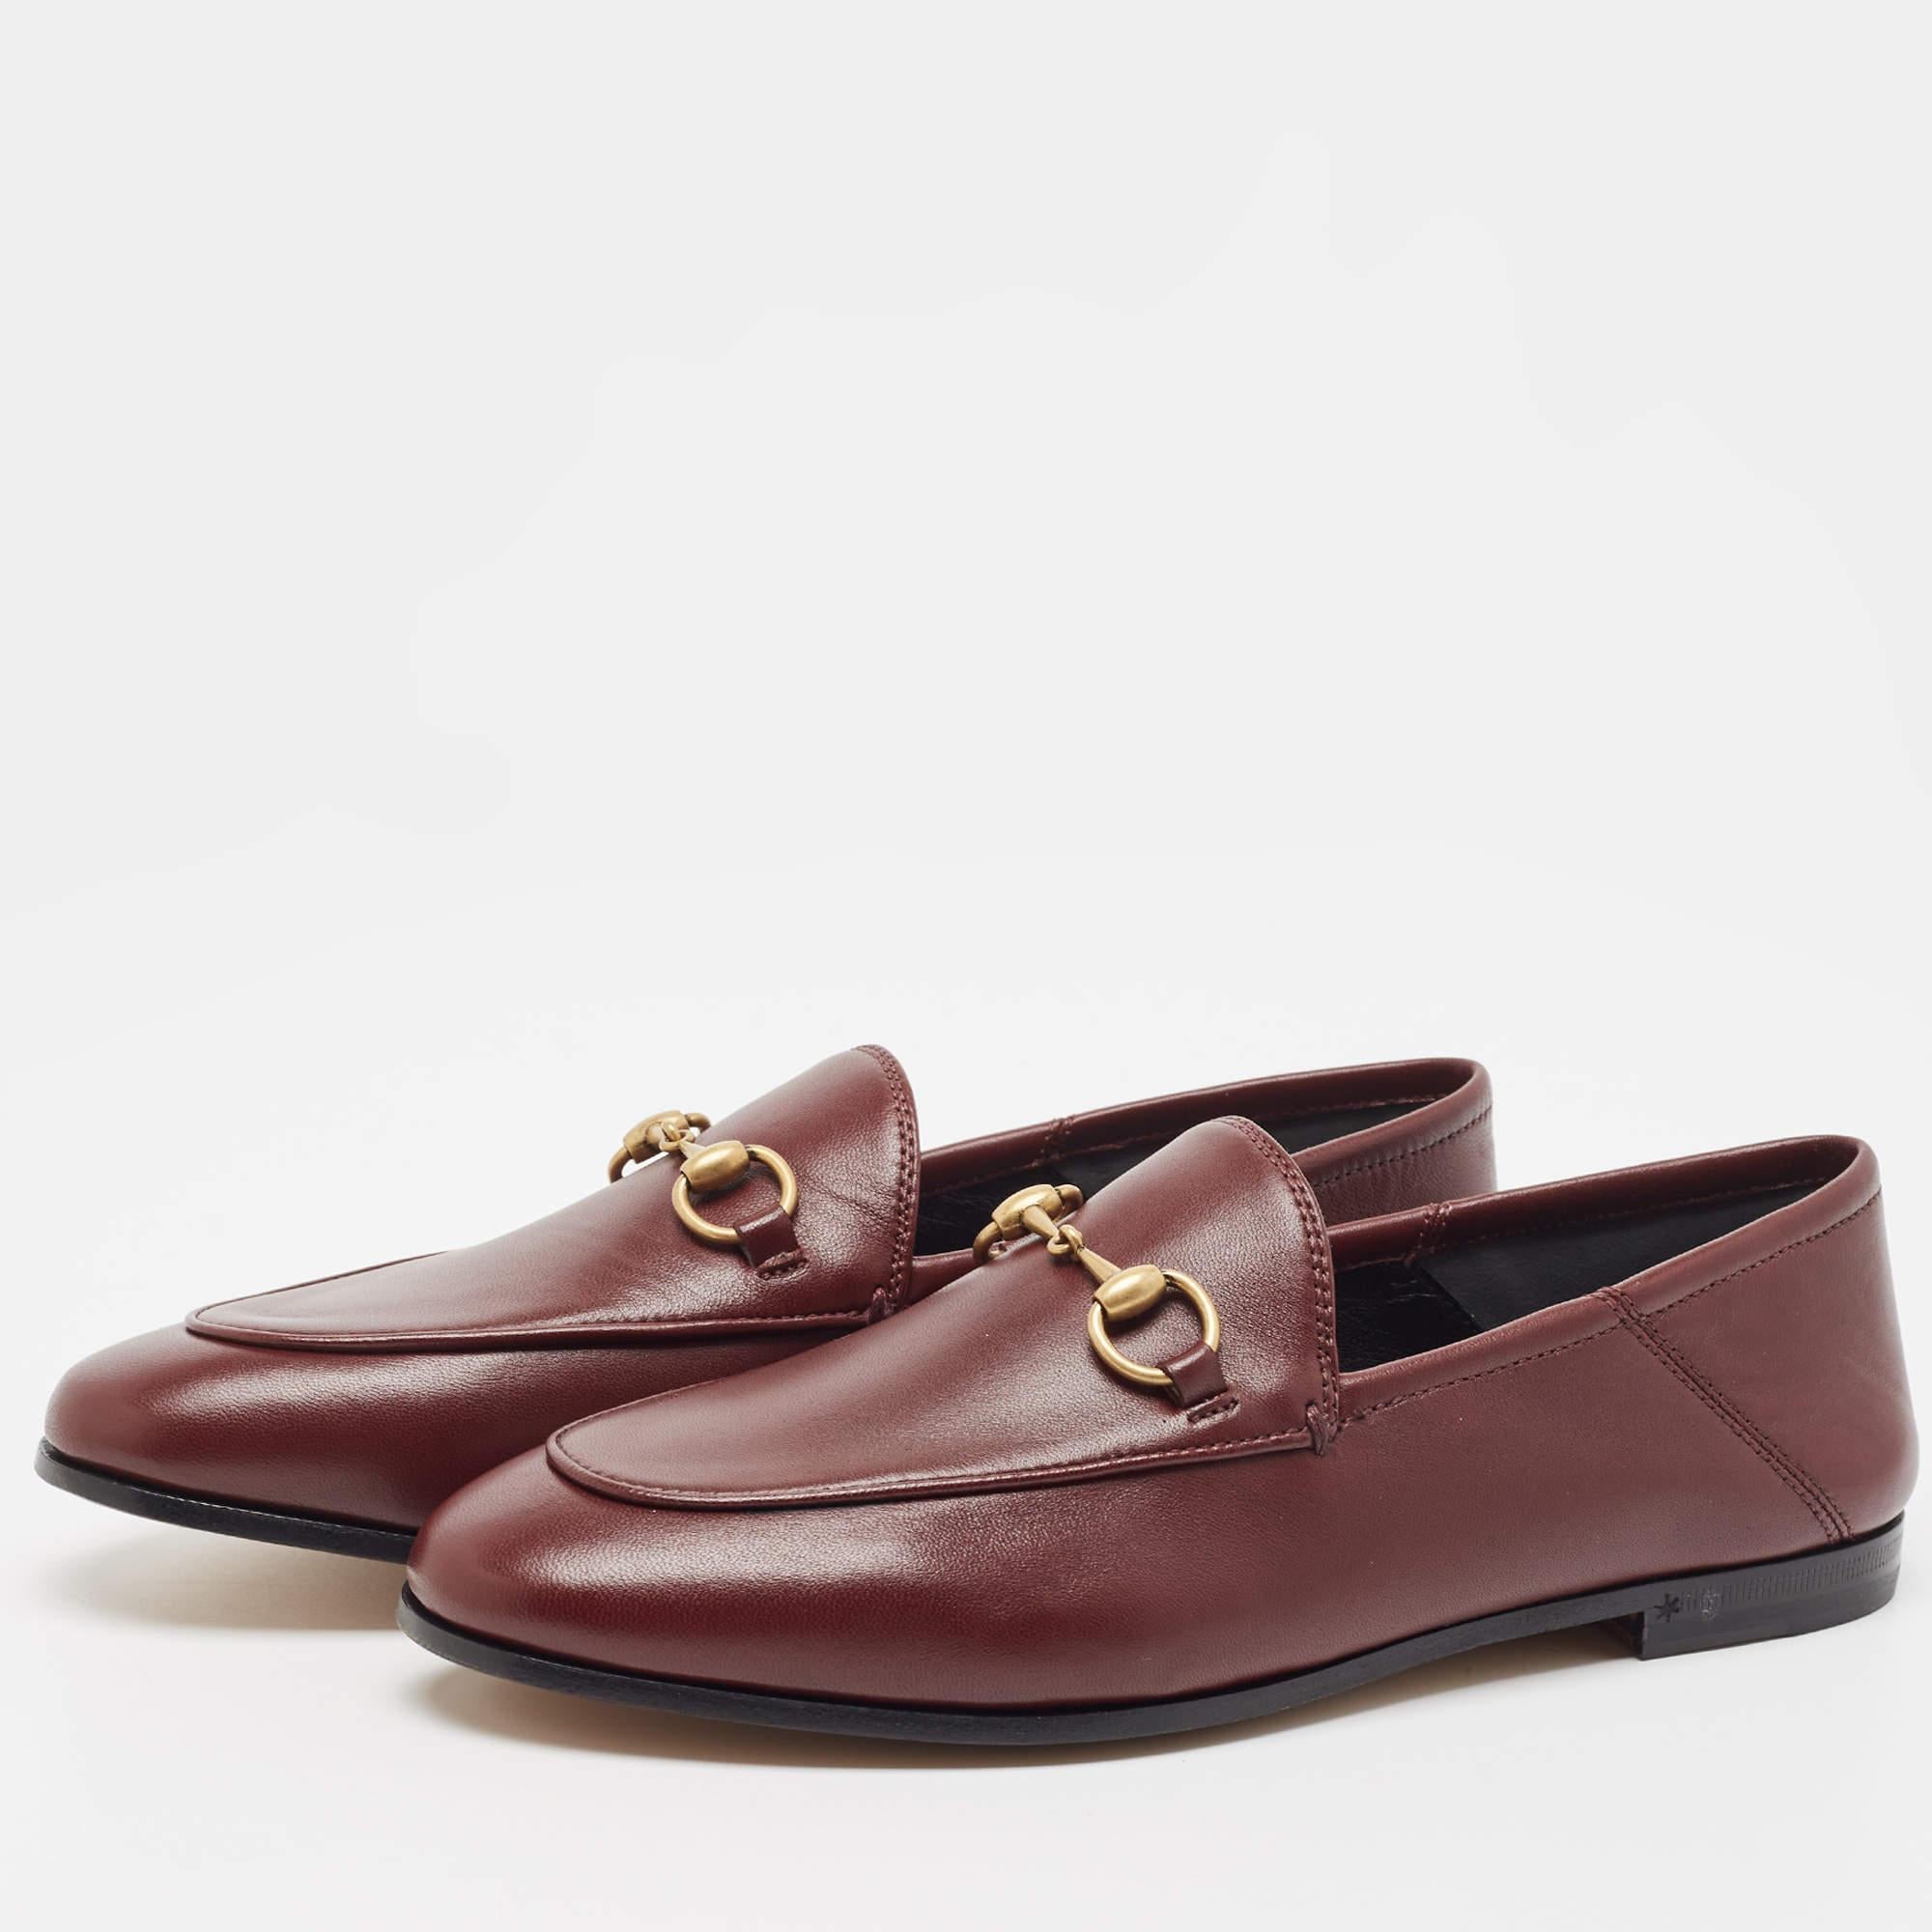 Practical, fashionable, and durable—these designer loafers are carefully built to be fine companions to your everyday style. They come made using the best materials to be a prized buy.

Includes: Original Dustbag, Original Box, Info Booklet